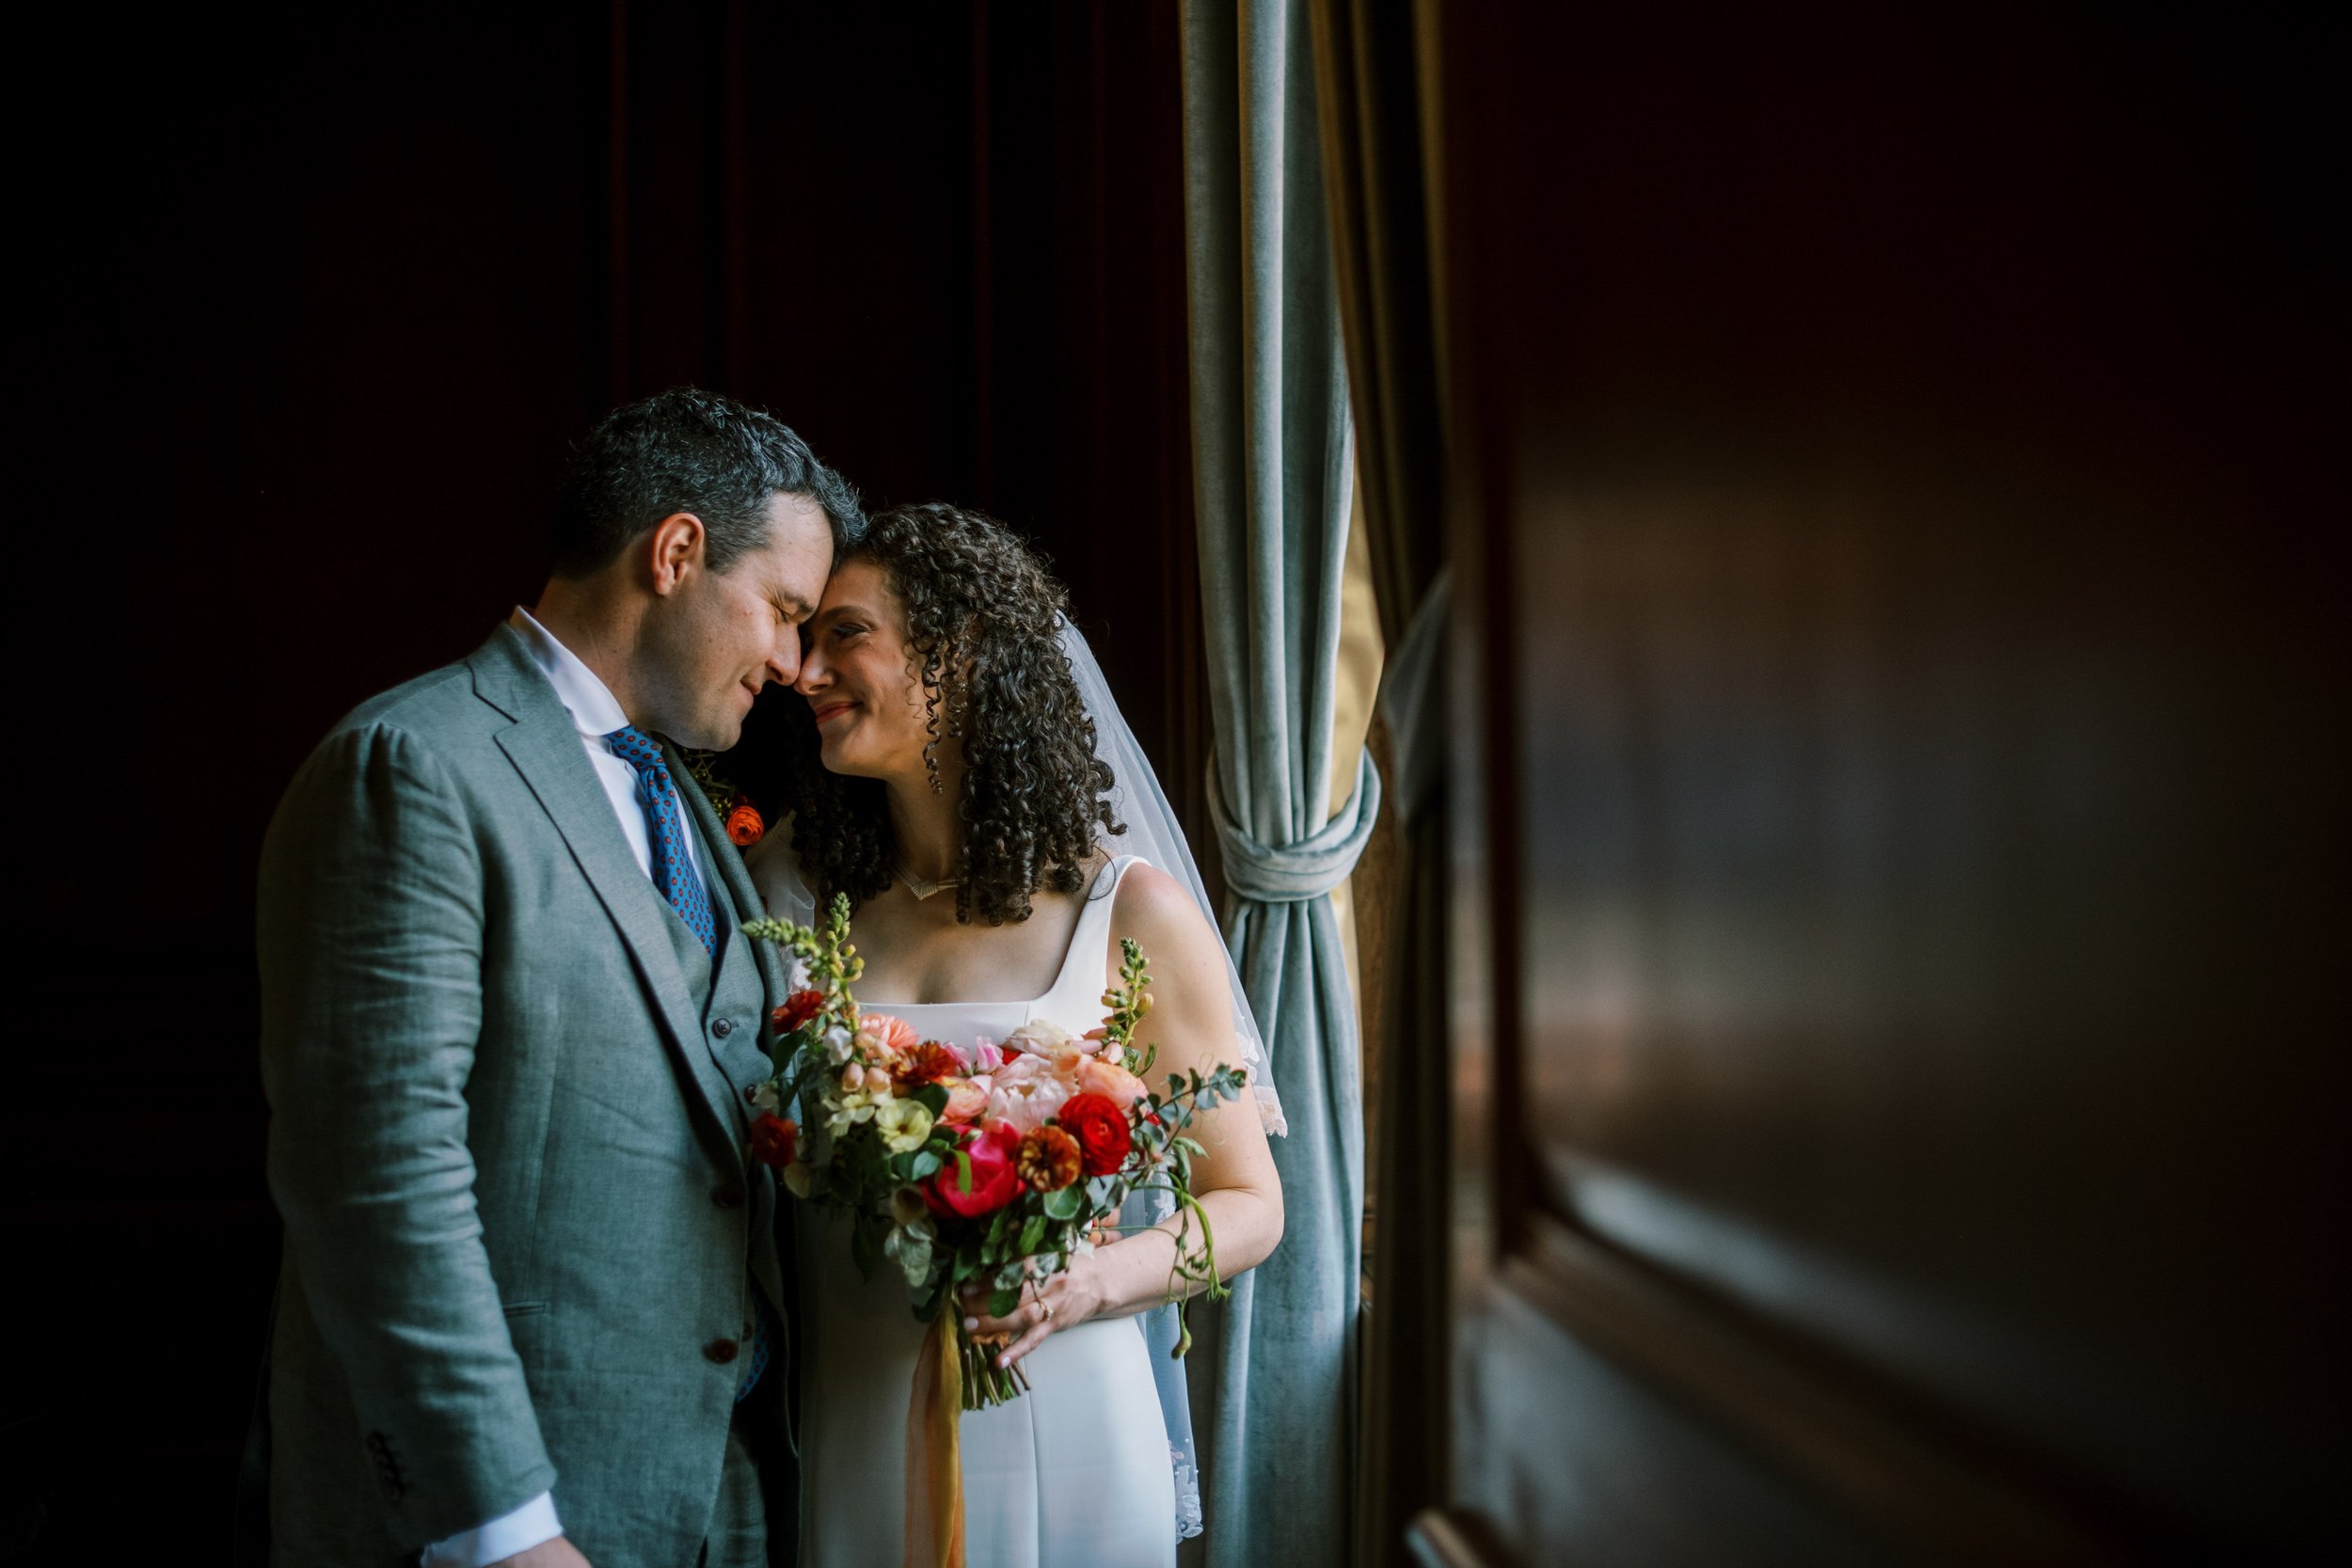 Just Married Bride and Groom at 21c Museum Hotel Durham Wedding Fancy This Photography 